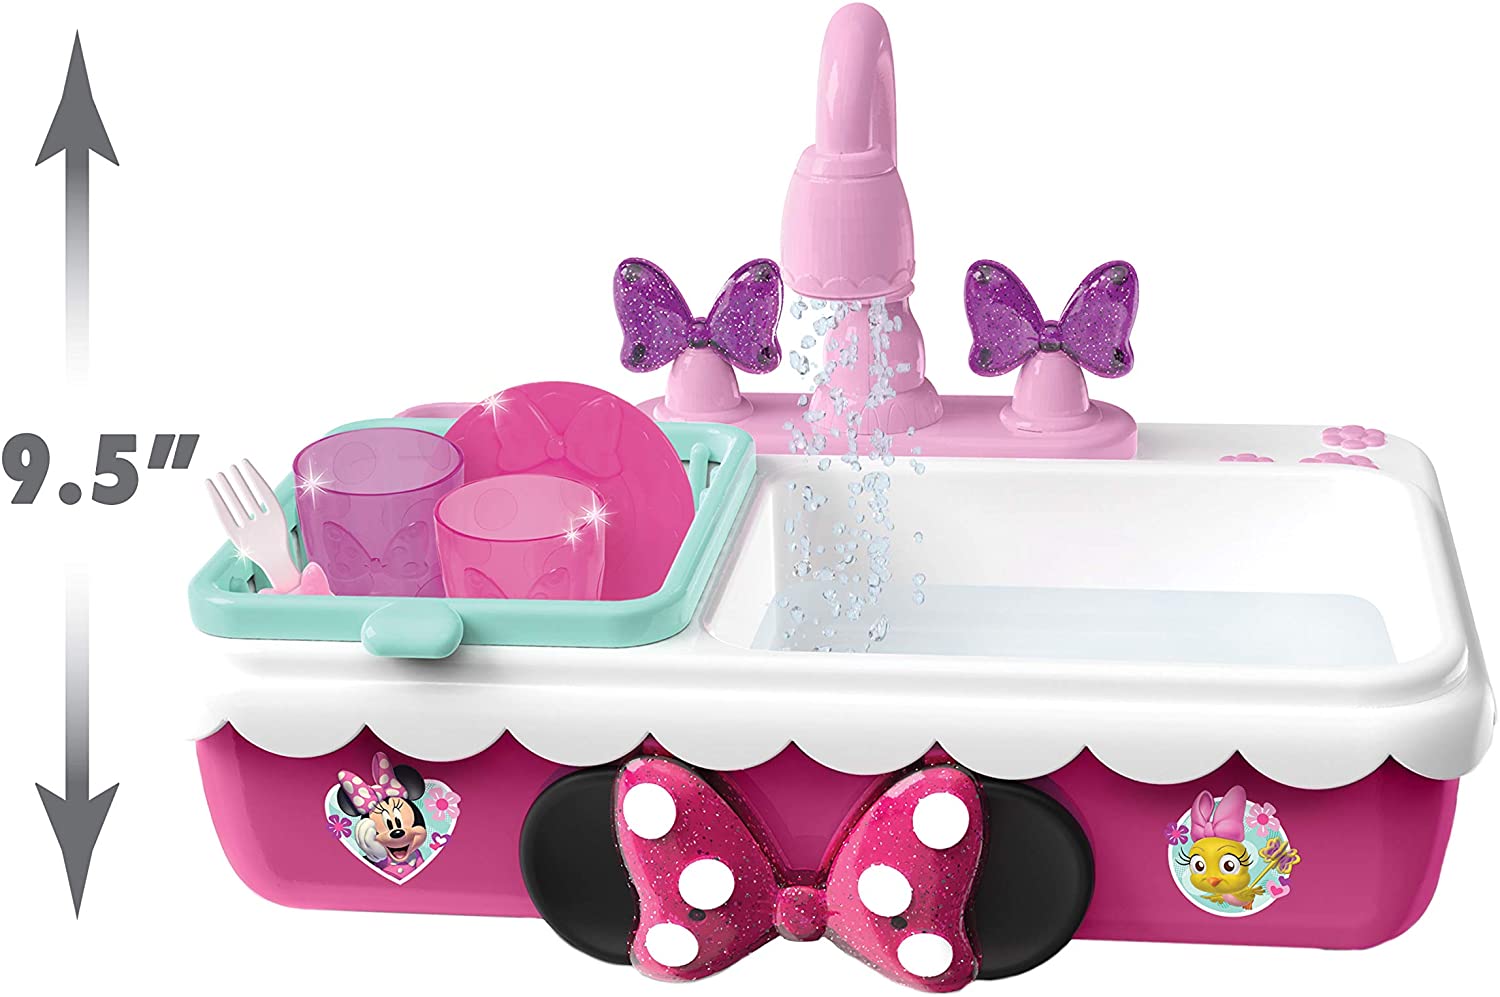 Happy Helpers Magic Sink Set, Pretend Play Working Sink, Kids Kitchen Set Toys, by Just Play, Multi-color